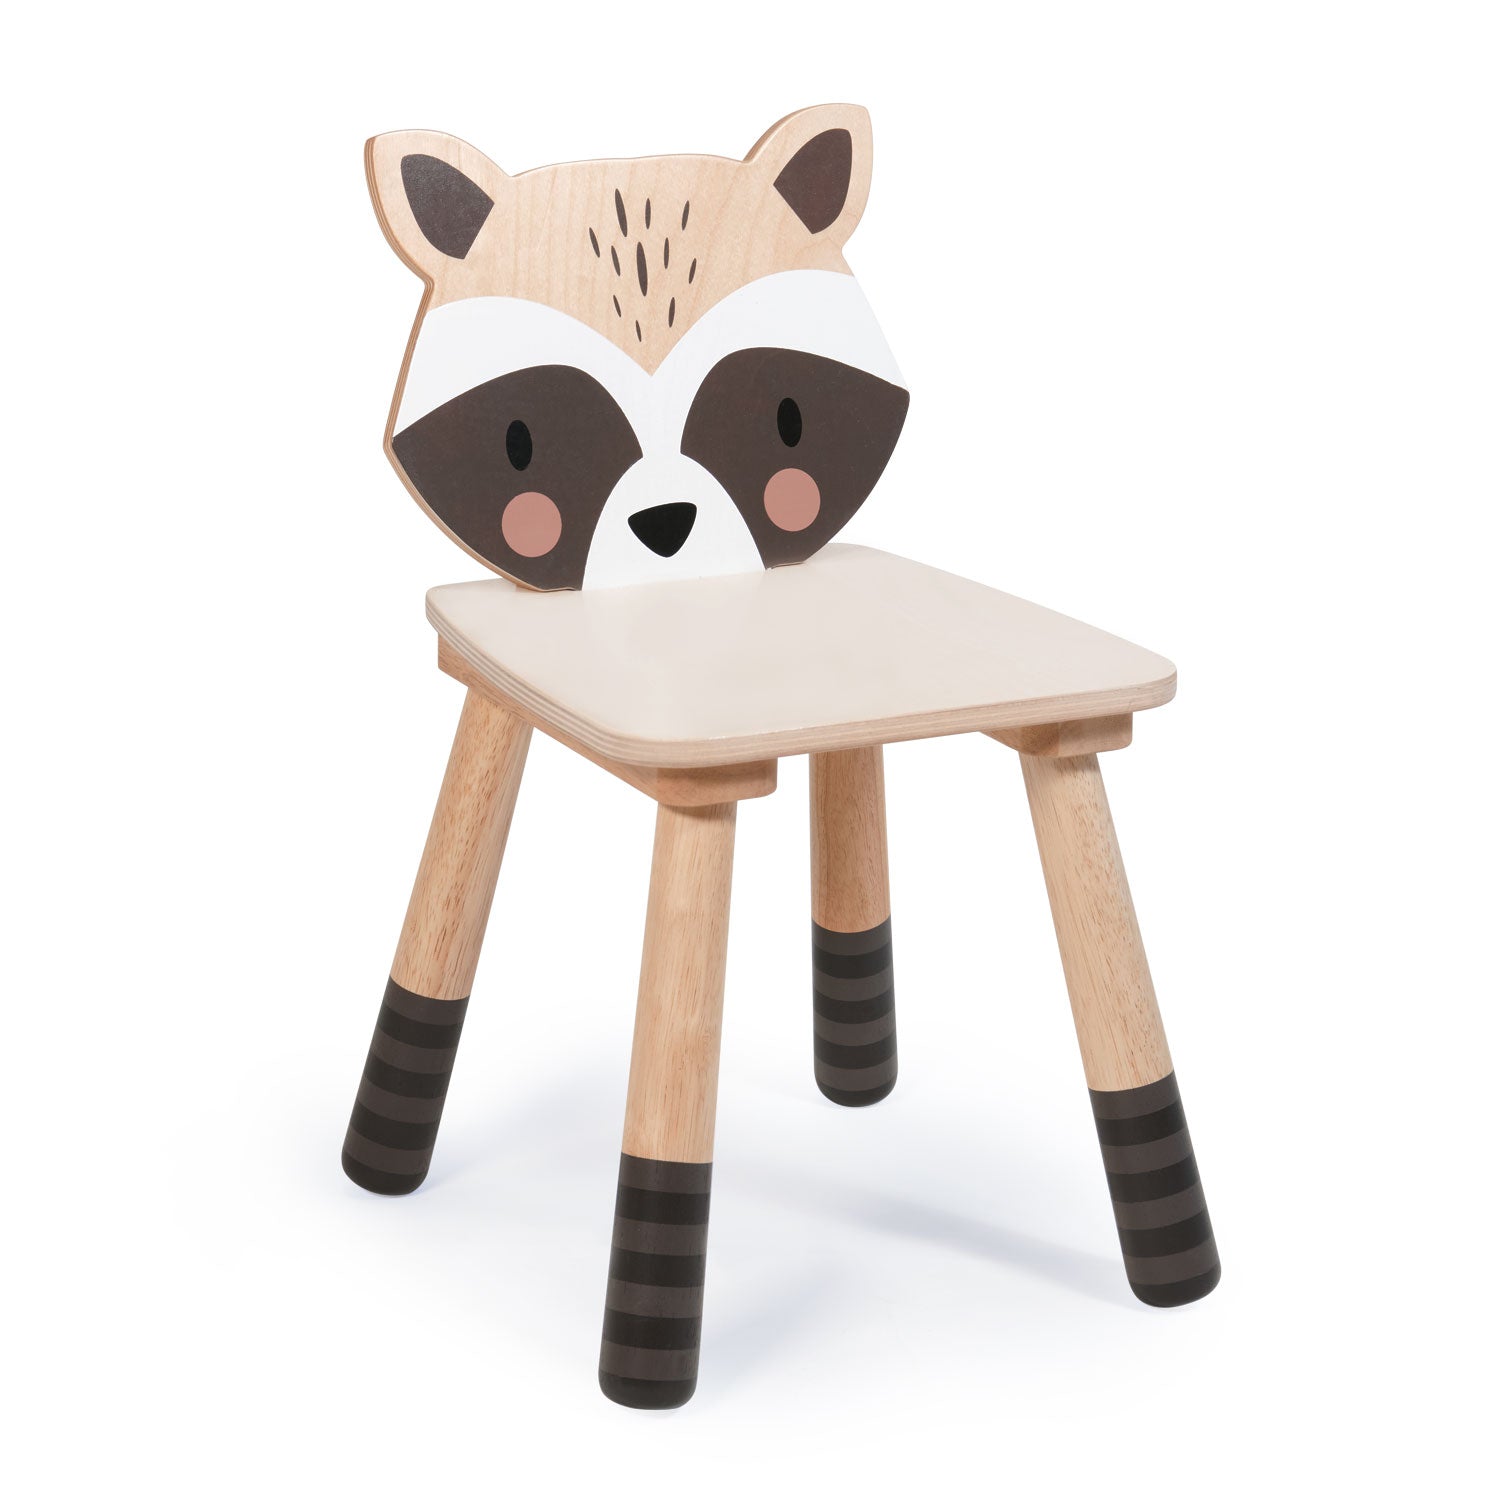 <p>A stylish raccoon chair made from top quality plywood.</p>
<p>Age range: 3 Years and Older  </p>
<p> Product size: 11.42 x 11.81 x 18.5”  </p>
<p>Seat height: 10.7&quot;  </p>
<p> Weight: 4.73 lbs  </p>
<p>Weight limit: 30 kgs </p>
<p><strong>Self assembly required.</strong></p>
